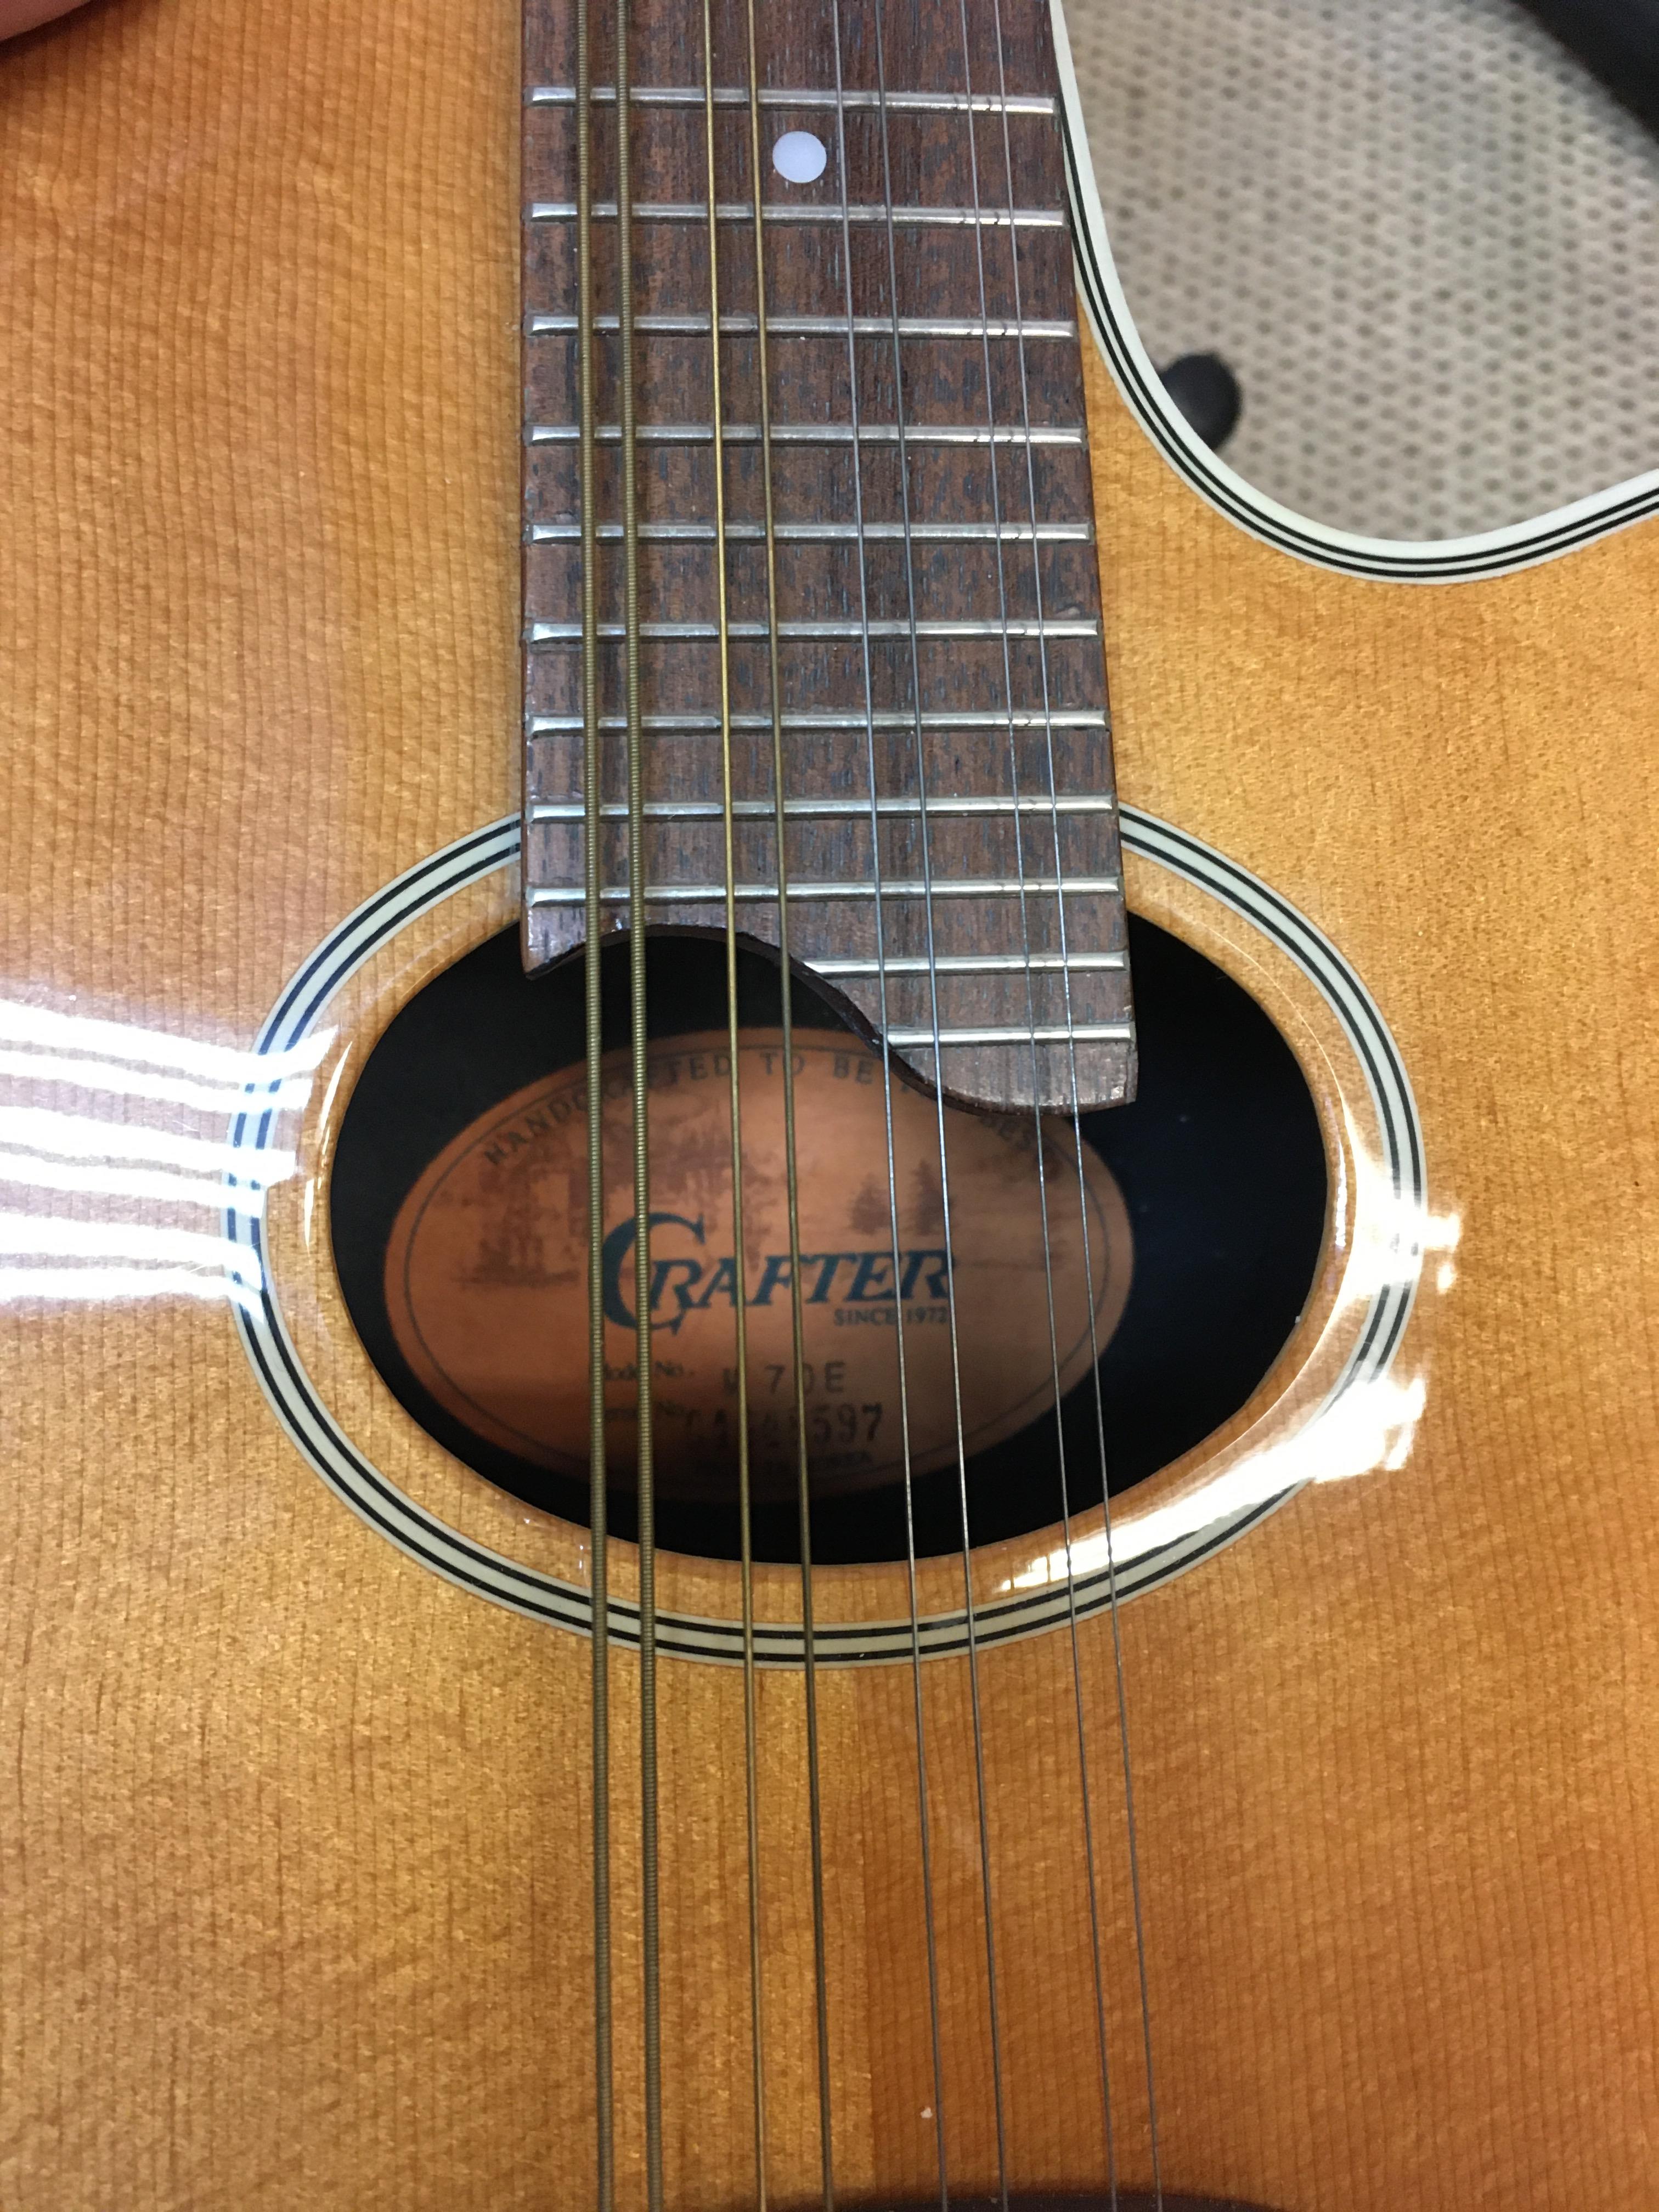 A Crafter model M70E semi acoustic mandolin eight string with cut away guitar body - Image 2 of 3